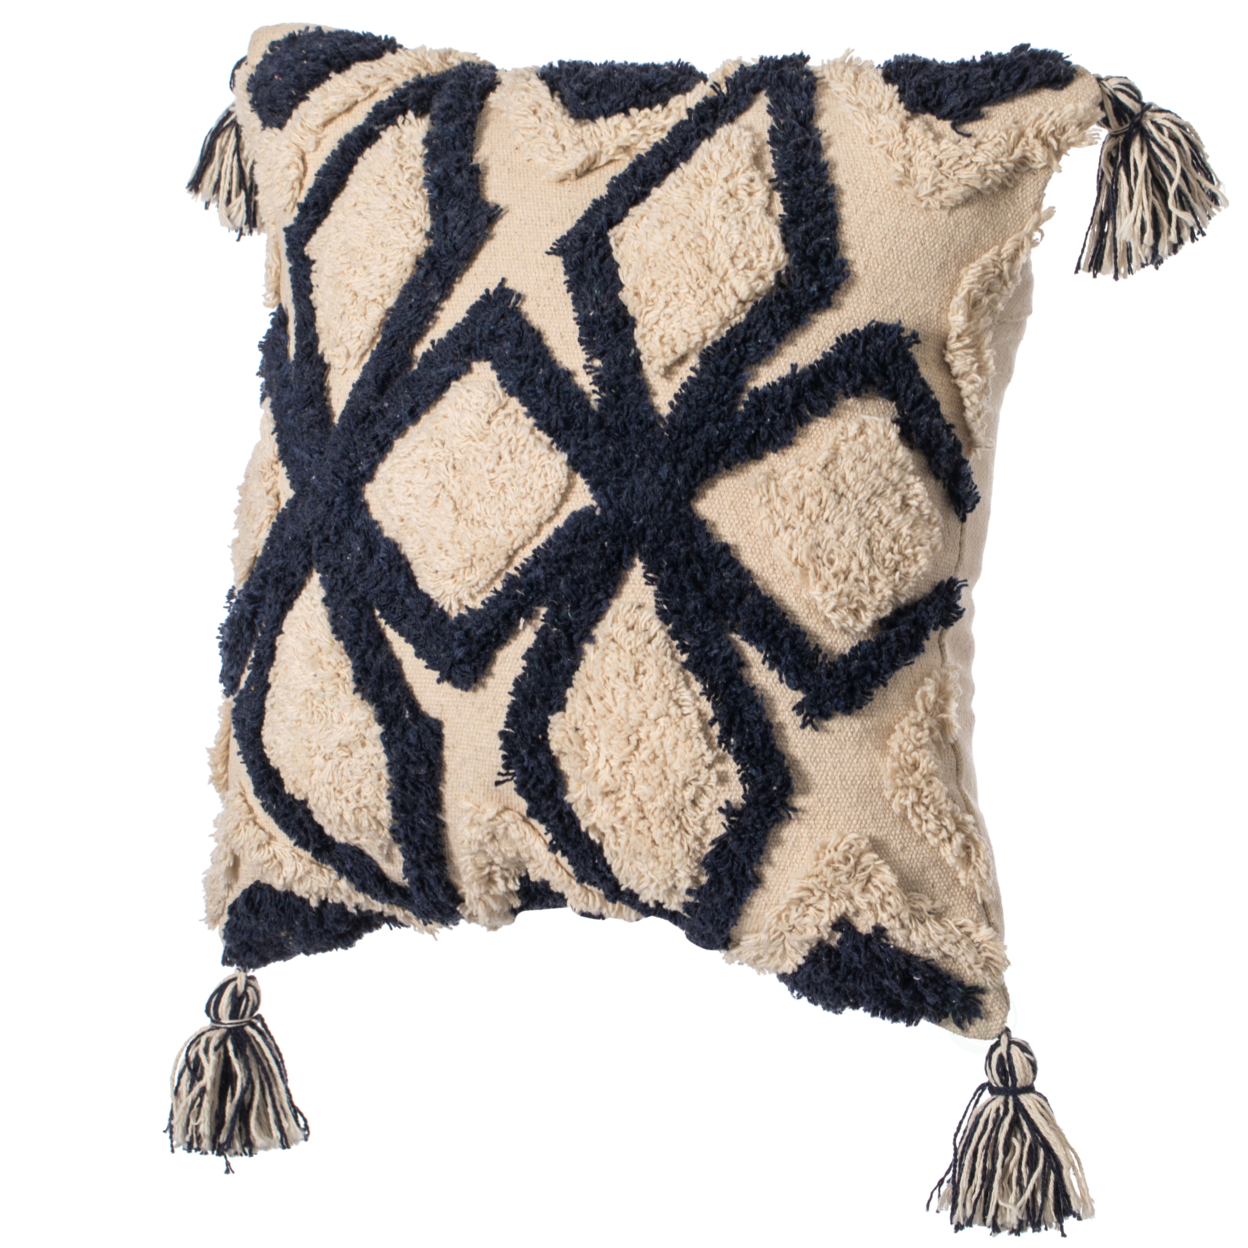 16 Handwoven Cotton Throw Pillow Cover With Tufted Designs And Side Tassels - Tribal With Cushion